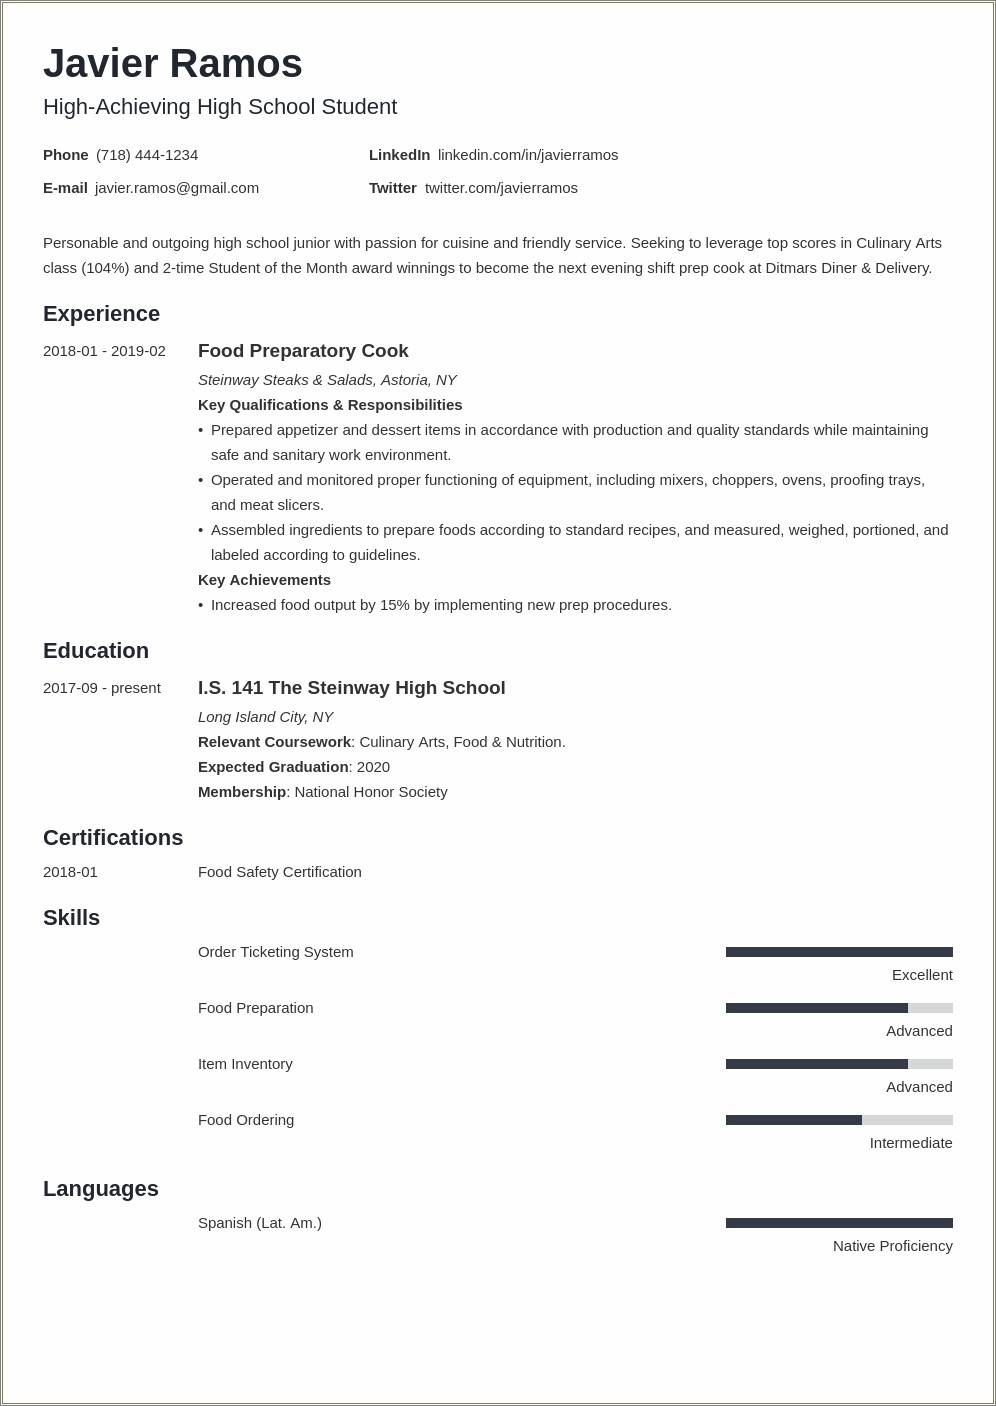 Resume Examples Done On Word For Studetns 2018